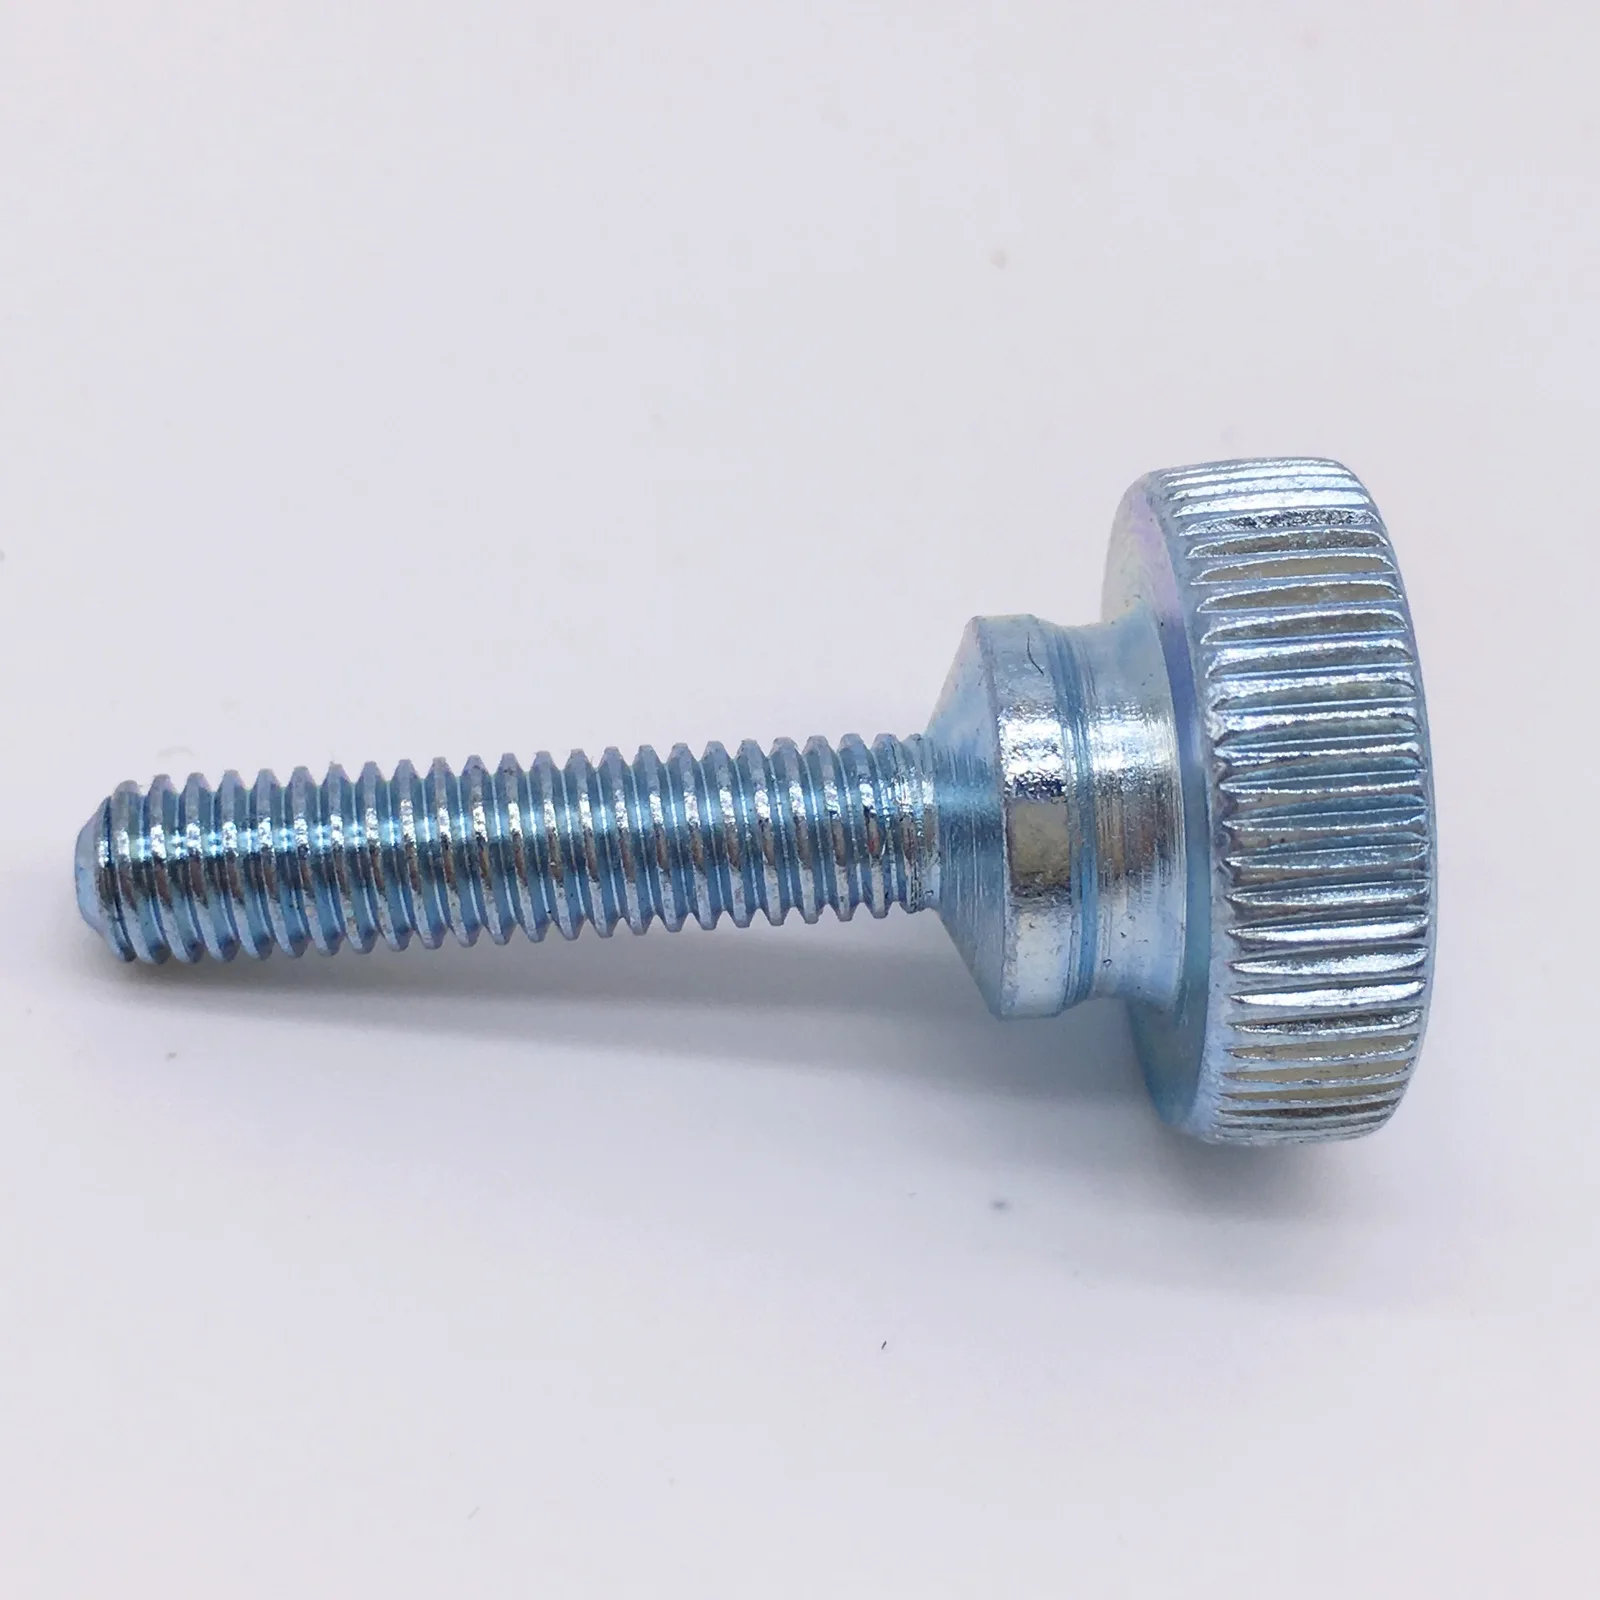 

M6x25 Thumb Screws Knurled Head With Should Bolts Metric Zinc Plated Pack 20